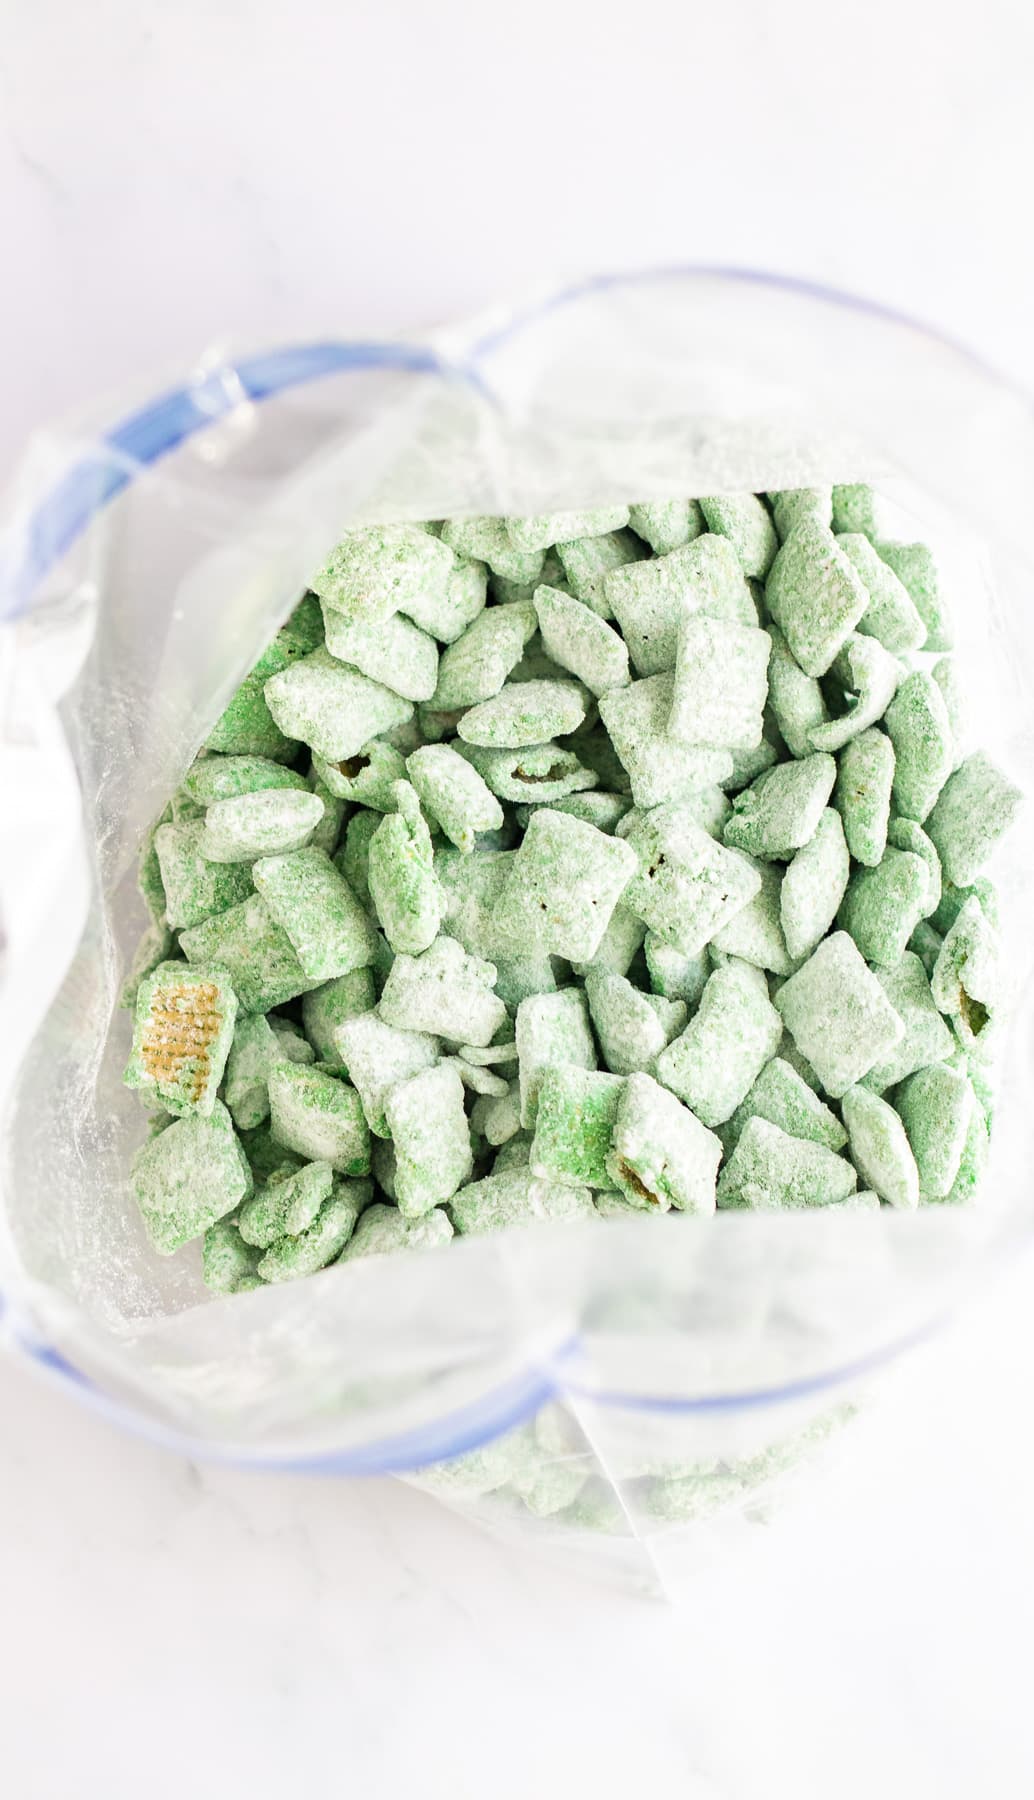 Rice chex cereal coated in green chocolate candy melts and powdered sugar in a large zip-top bag from overhead.